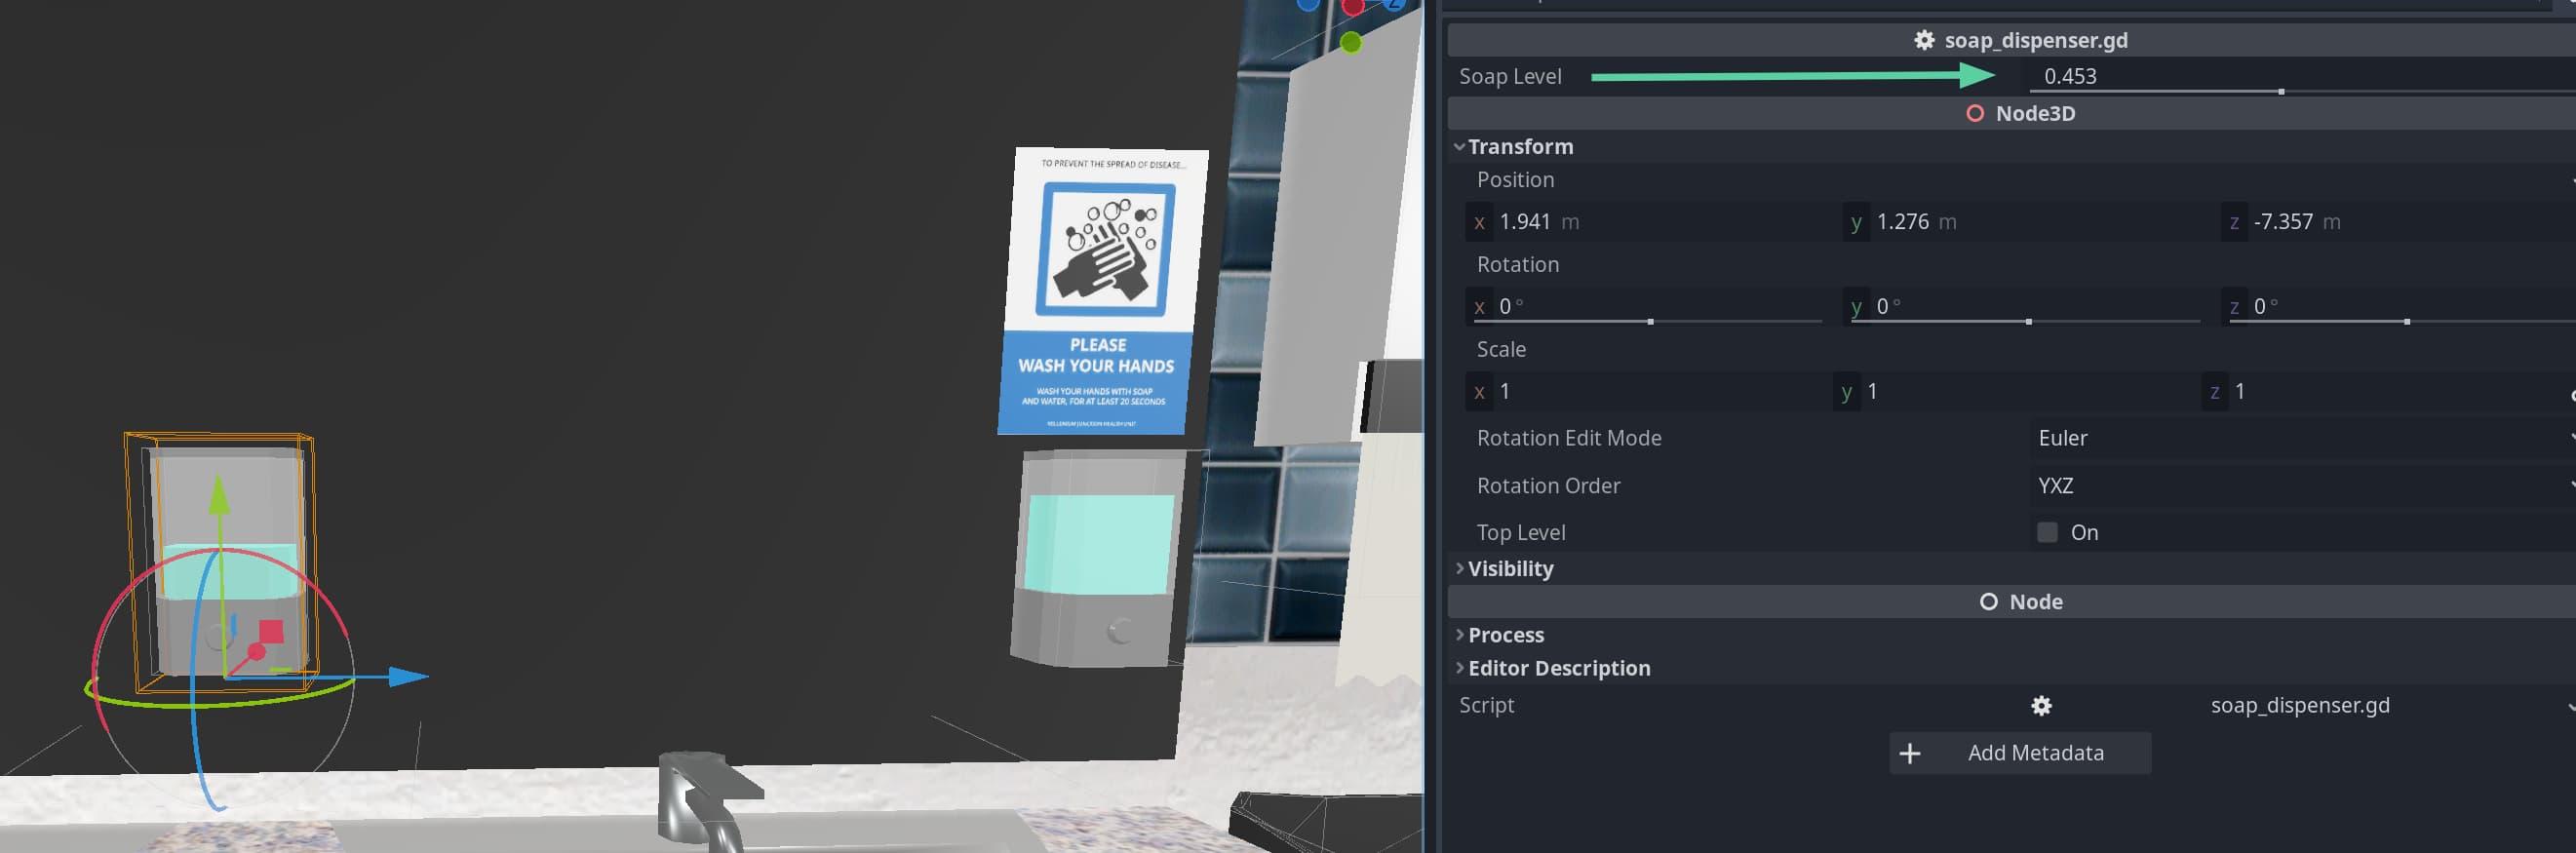 A Godot editor screenshot, showing a slider for Soap Level betwen 0 and 1, currently at 0.453, for a selected soap dispenser